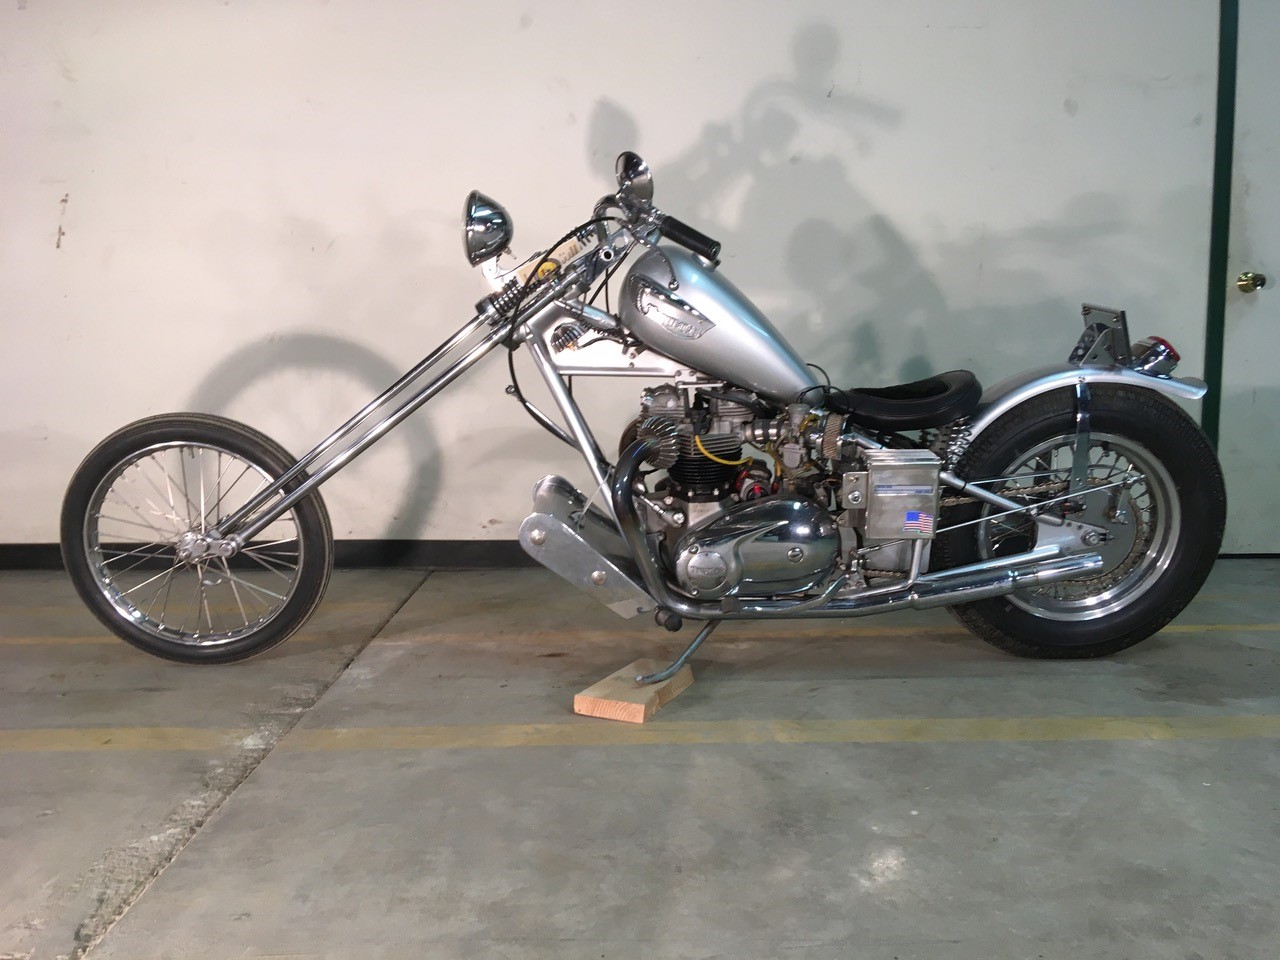 Vintage Motorcycle Auction & Open House! National Motorcycle Museum!  Call today to Consign!  - image 1